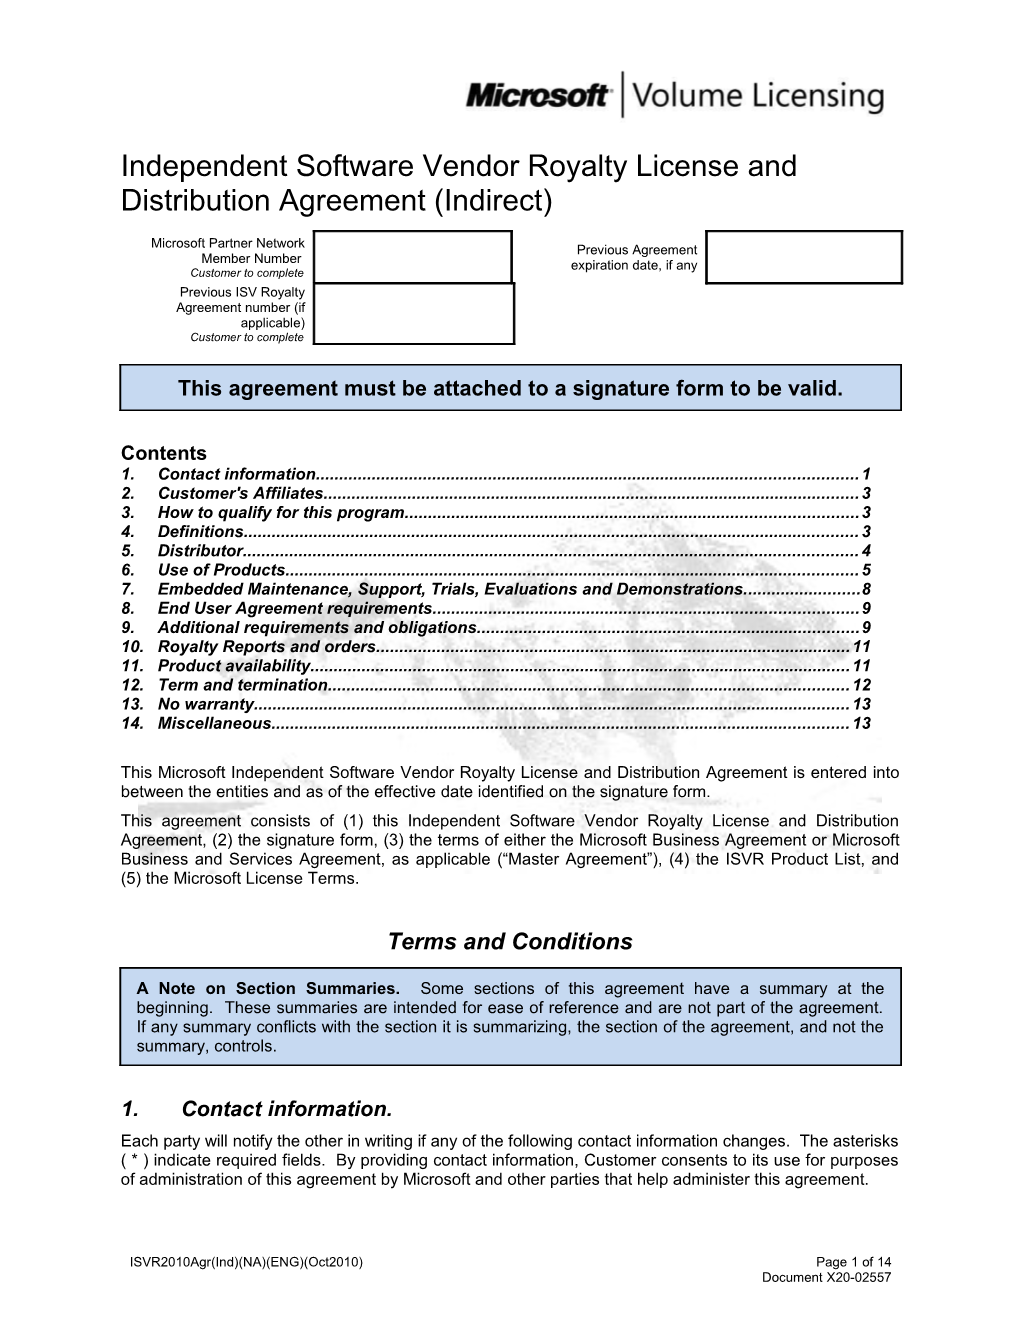 Independent Software Vendor Royalty License and Distribution Agreement (Indirect)